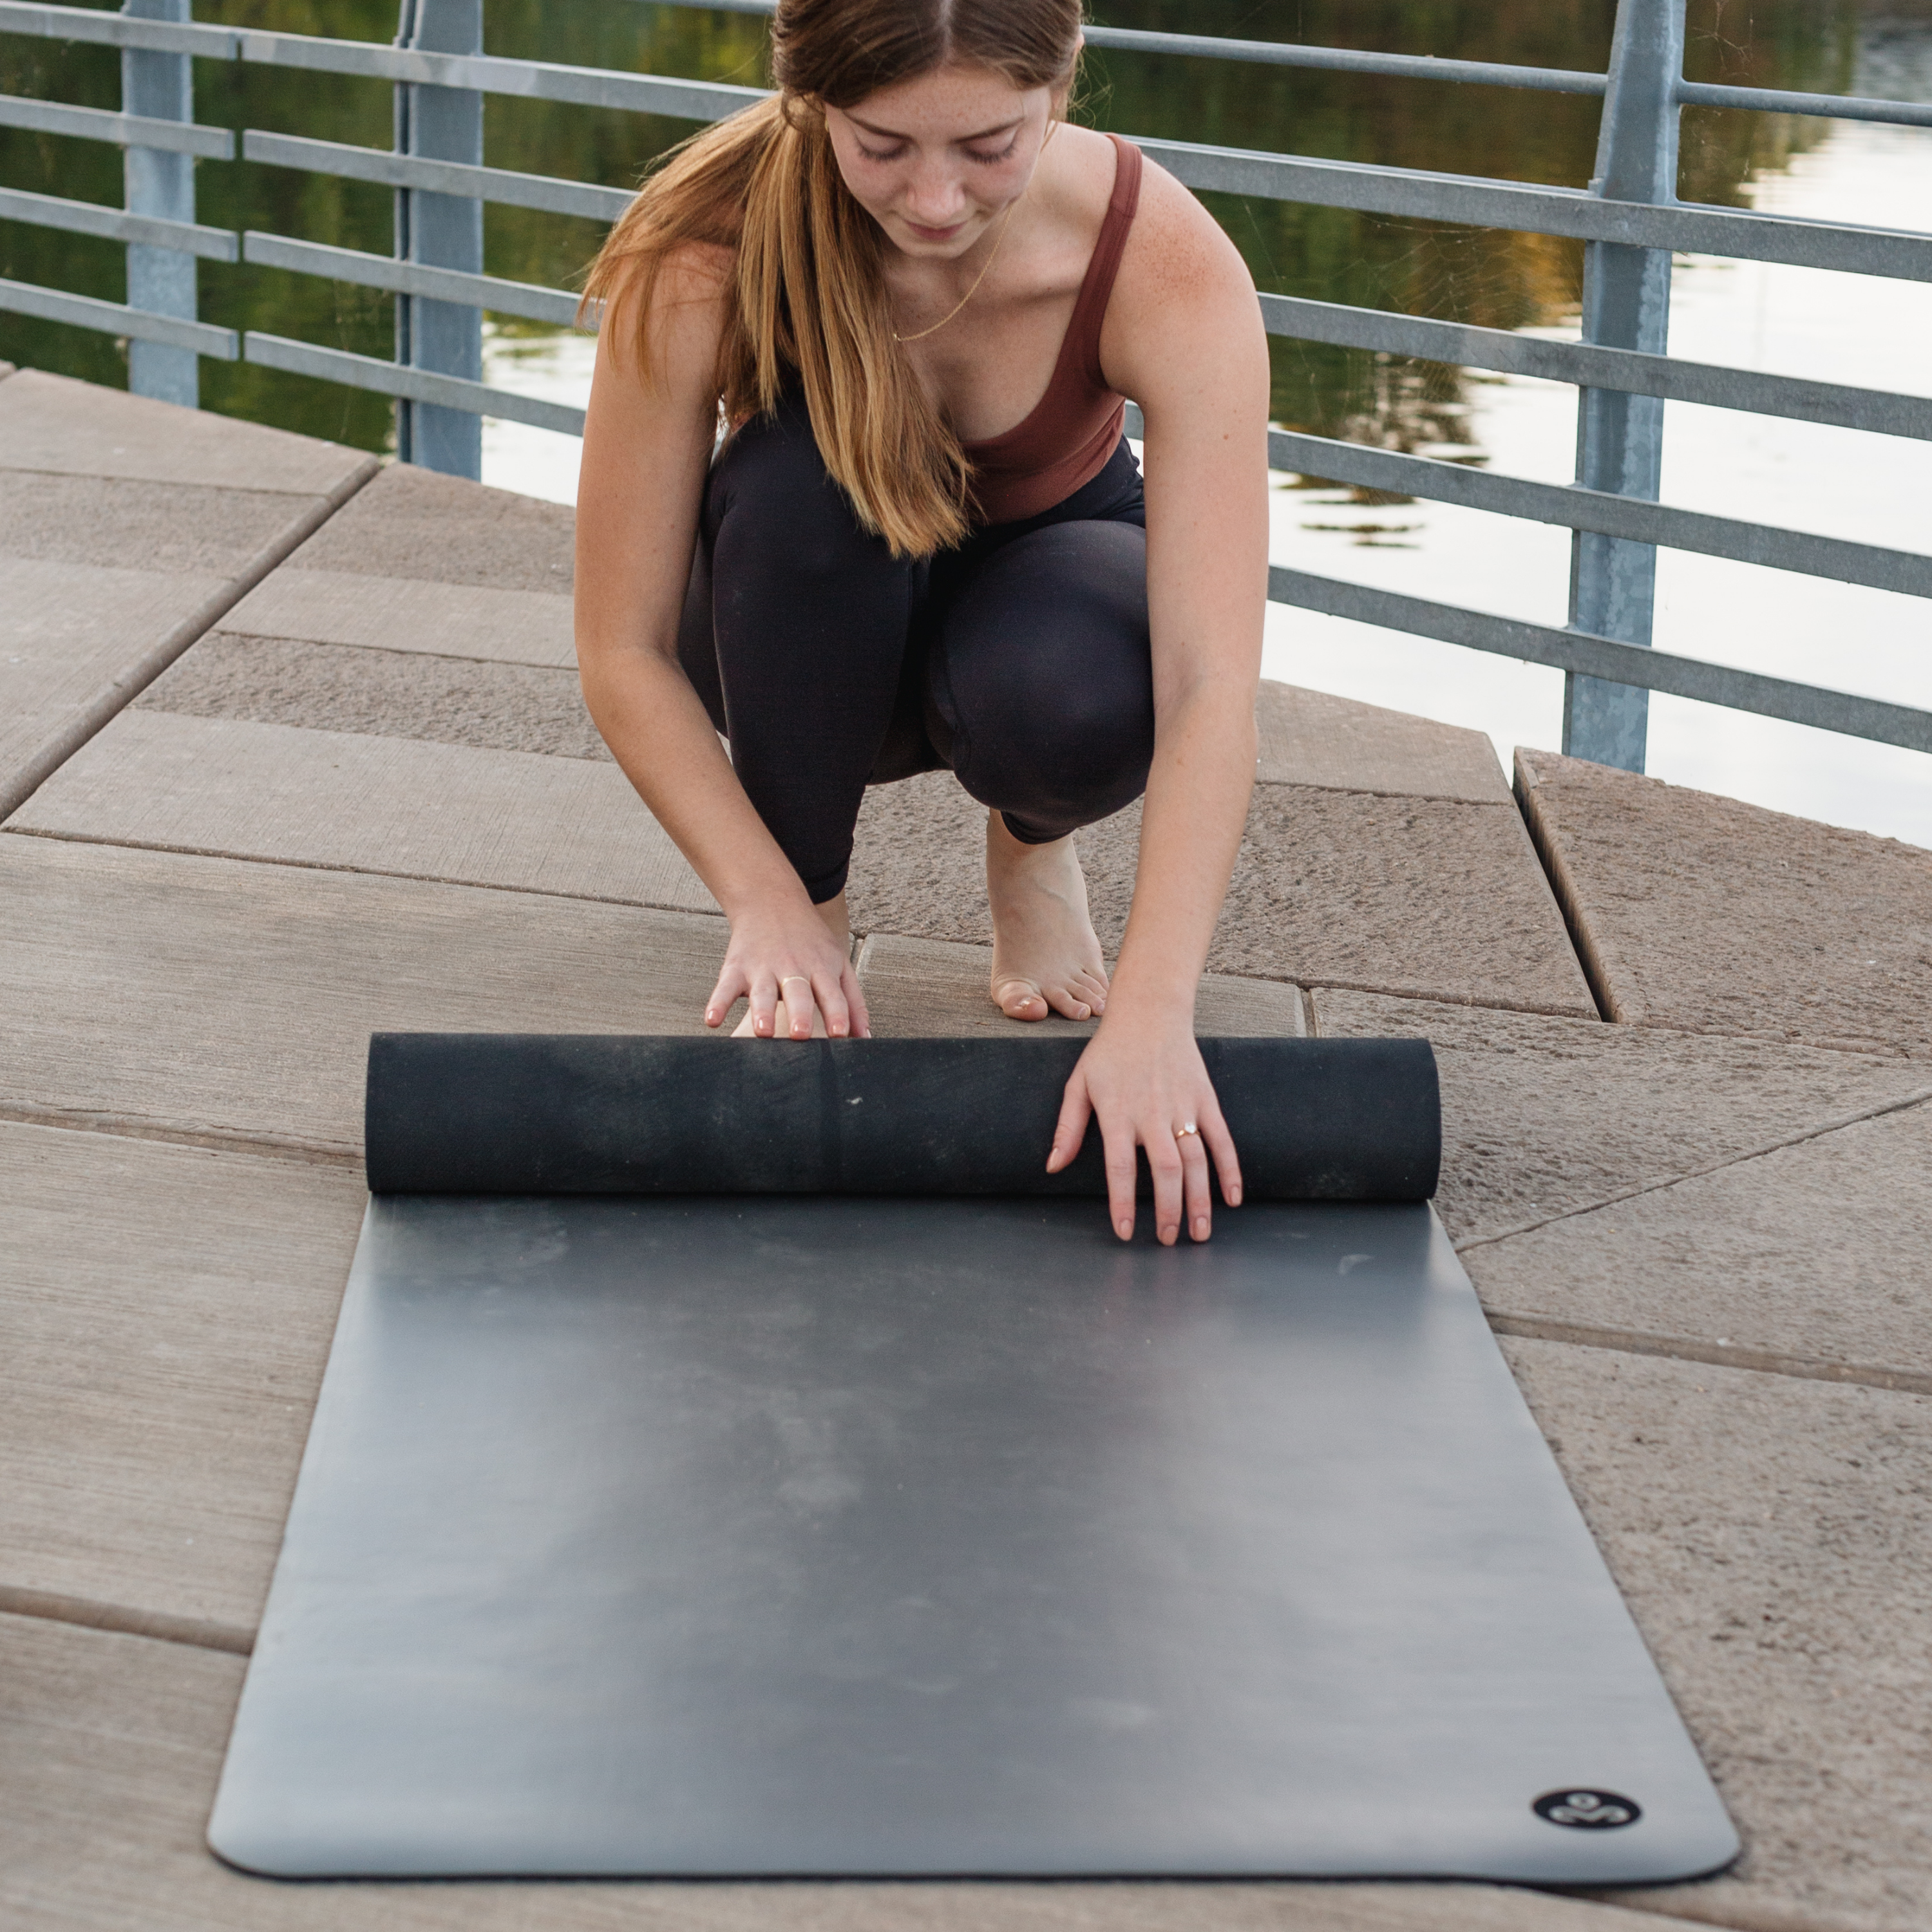 Product Review: lululemon Reversible 5mm mat — Empower Yoga